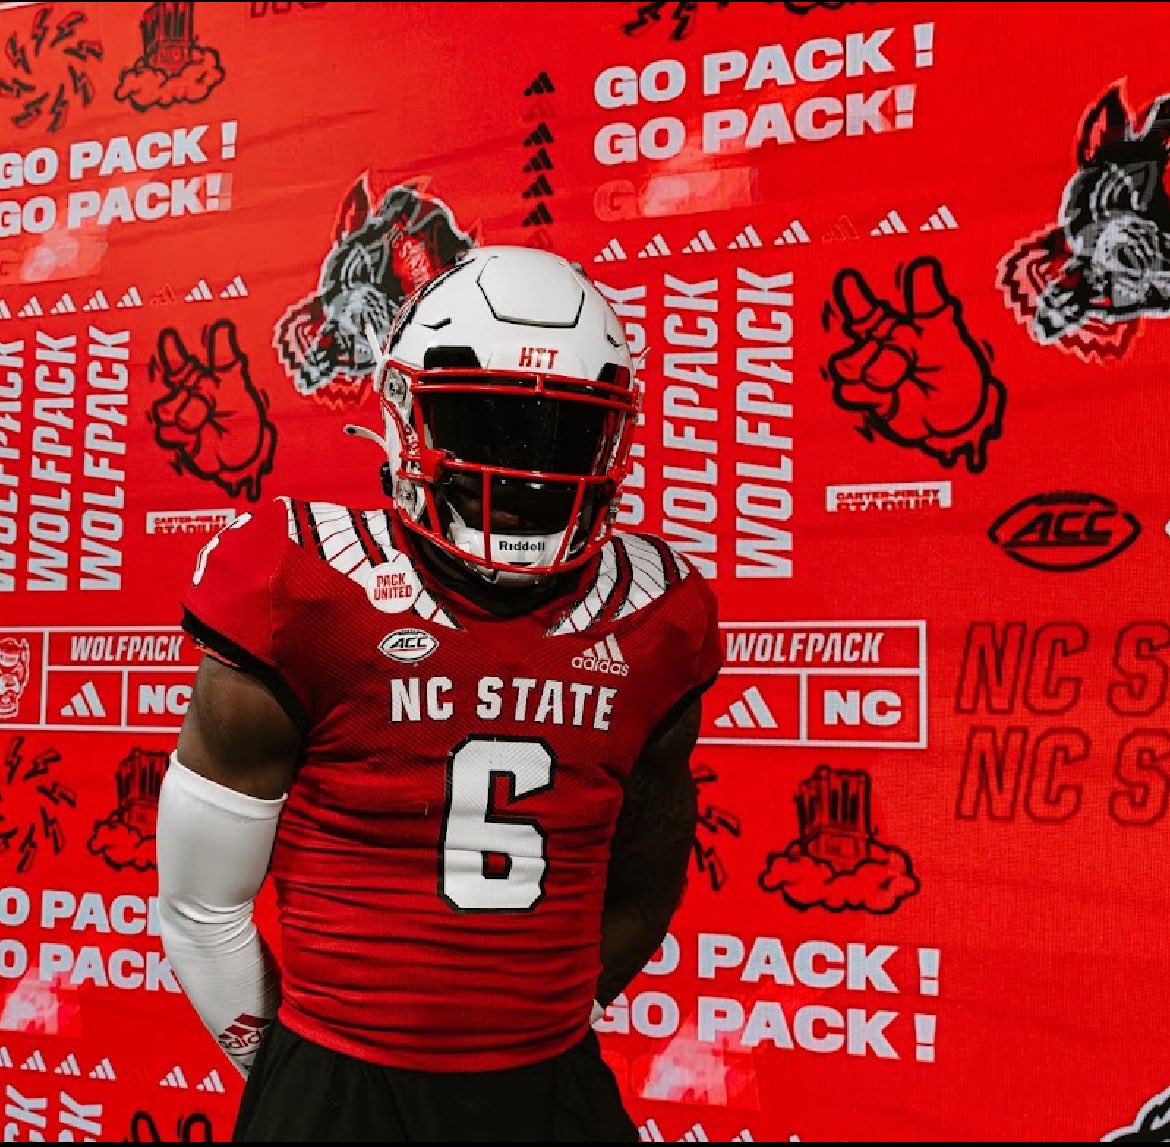 Excited to say I’m COMMITTED. LETS WORK! #1Pack1Goal🐺